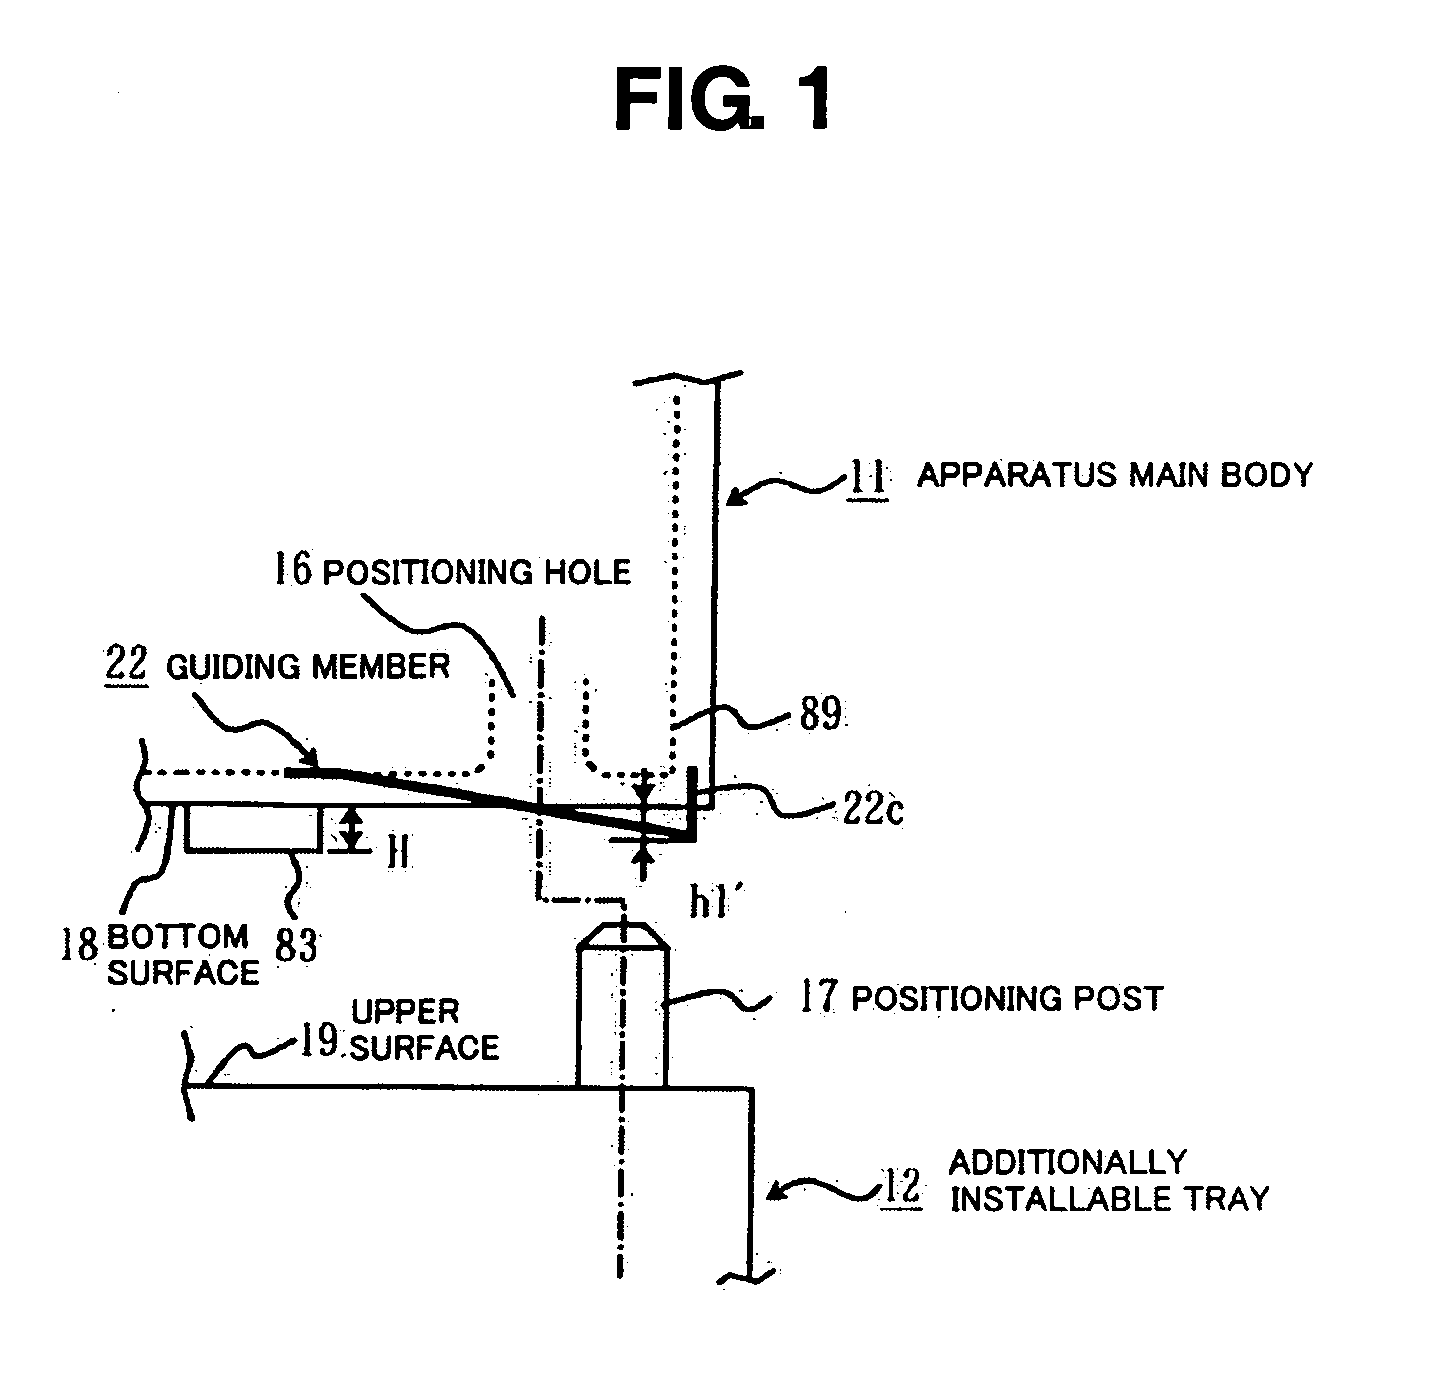 Image forming apparatus and additionally installable apparatus